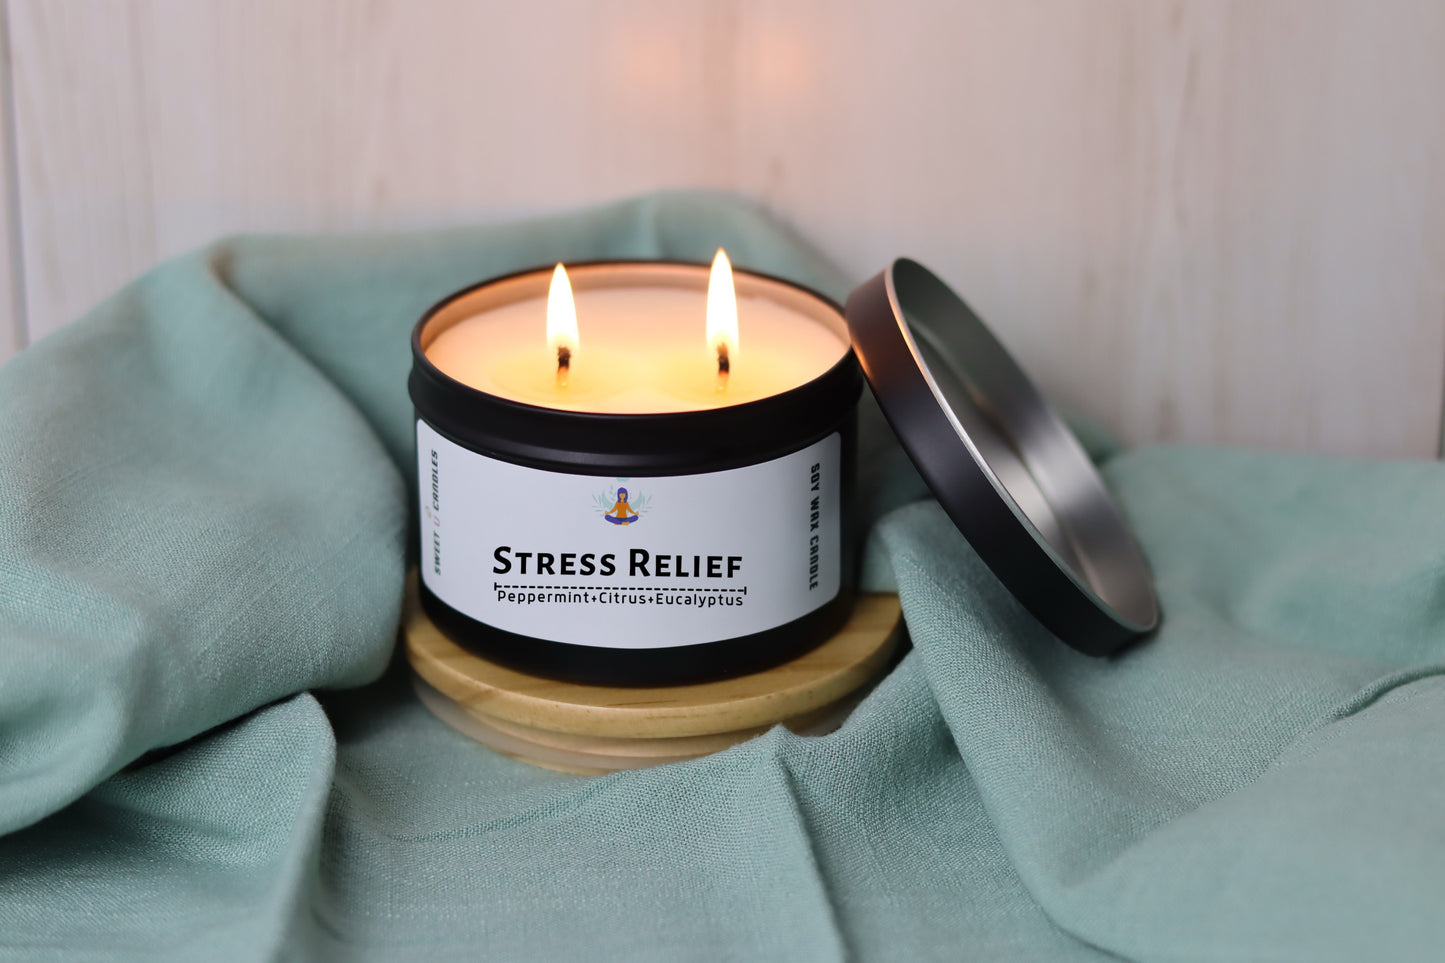 STRESS RELIEF - Sweet U Candles 